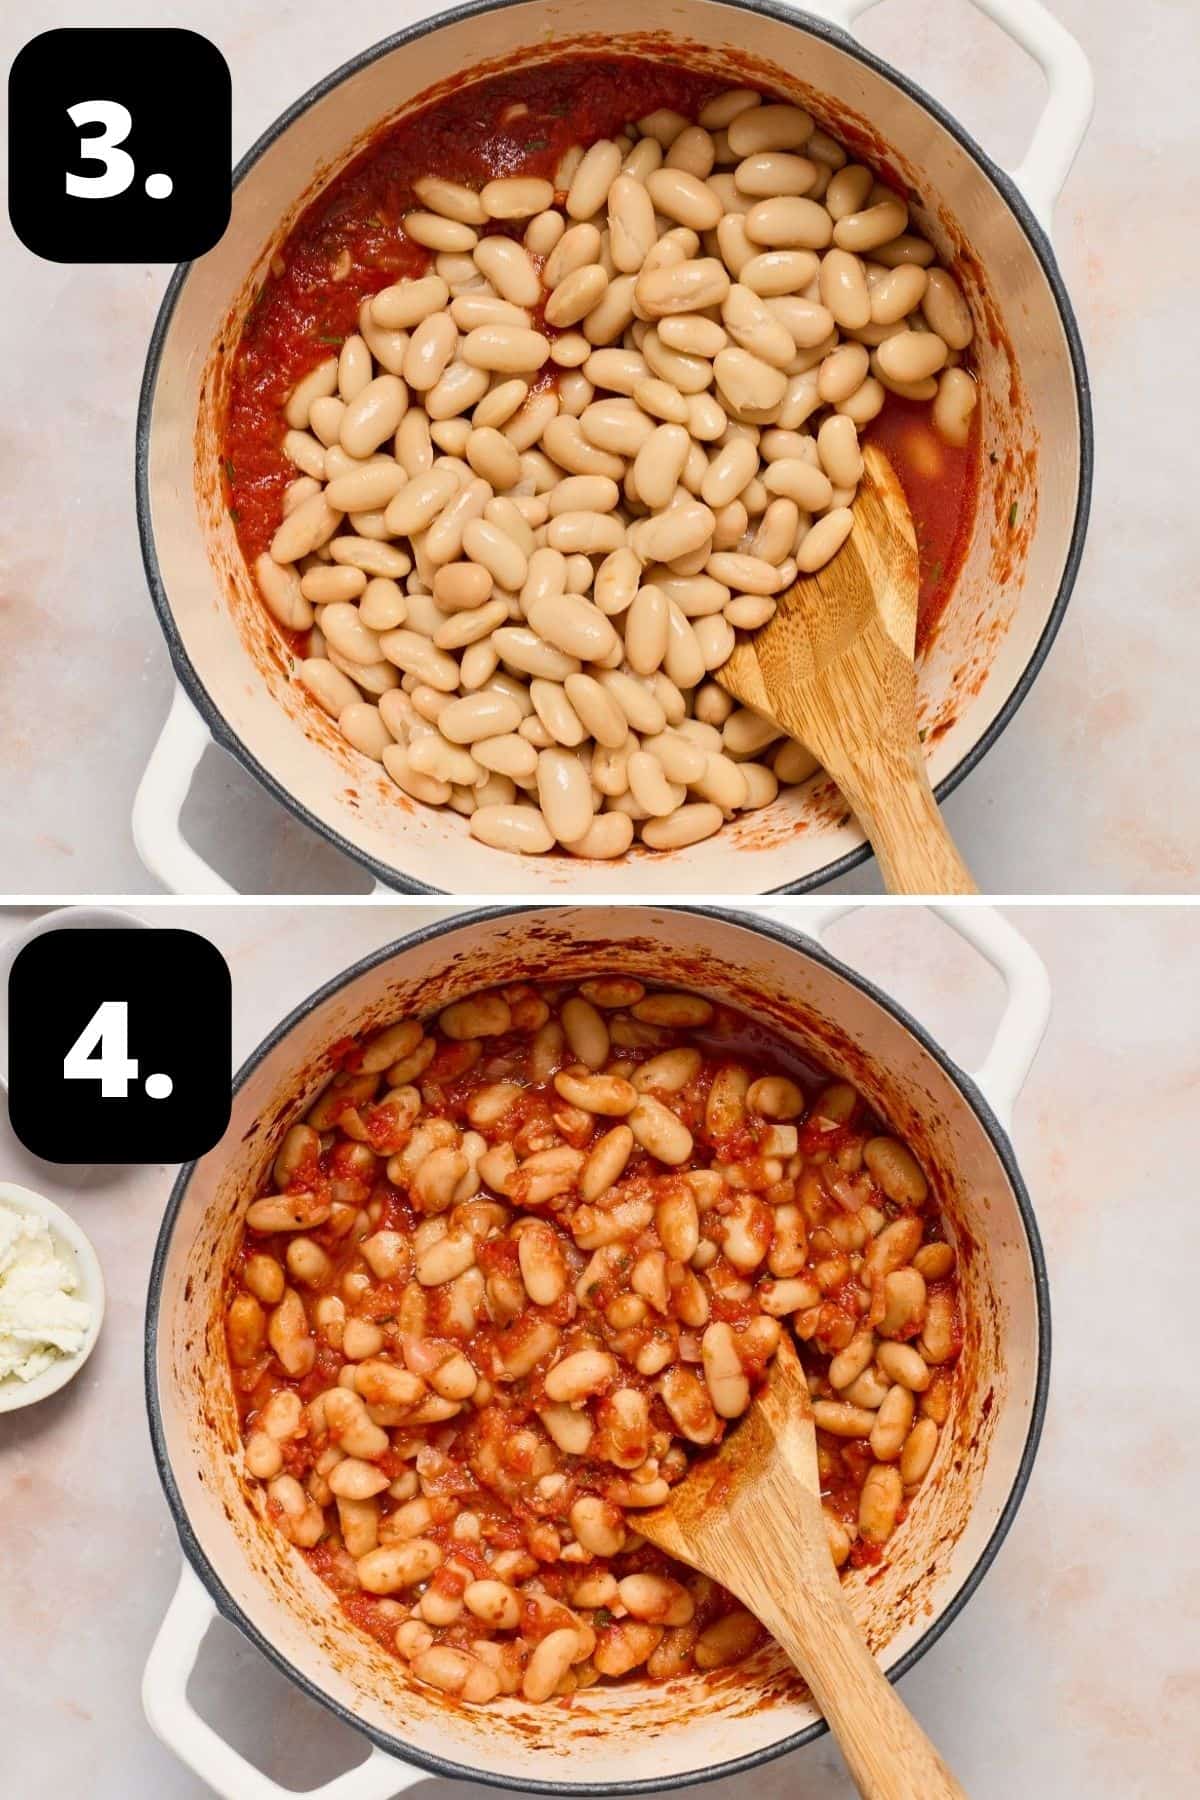 Steps 3-4 of preparing this recipe: the beans added to a tomato sauce and the cooked dish ready for serving.